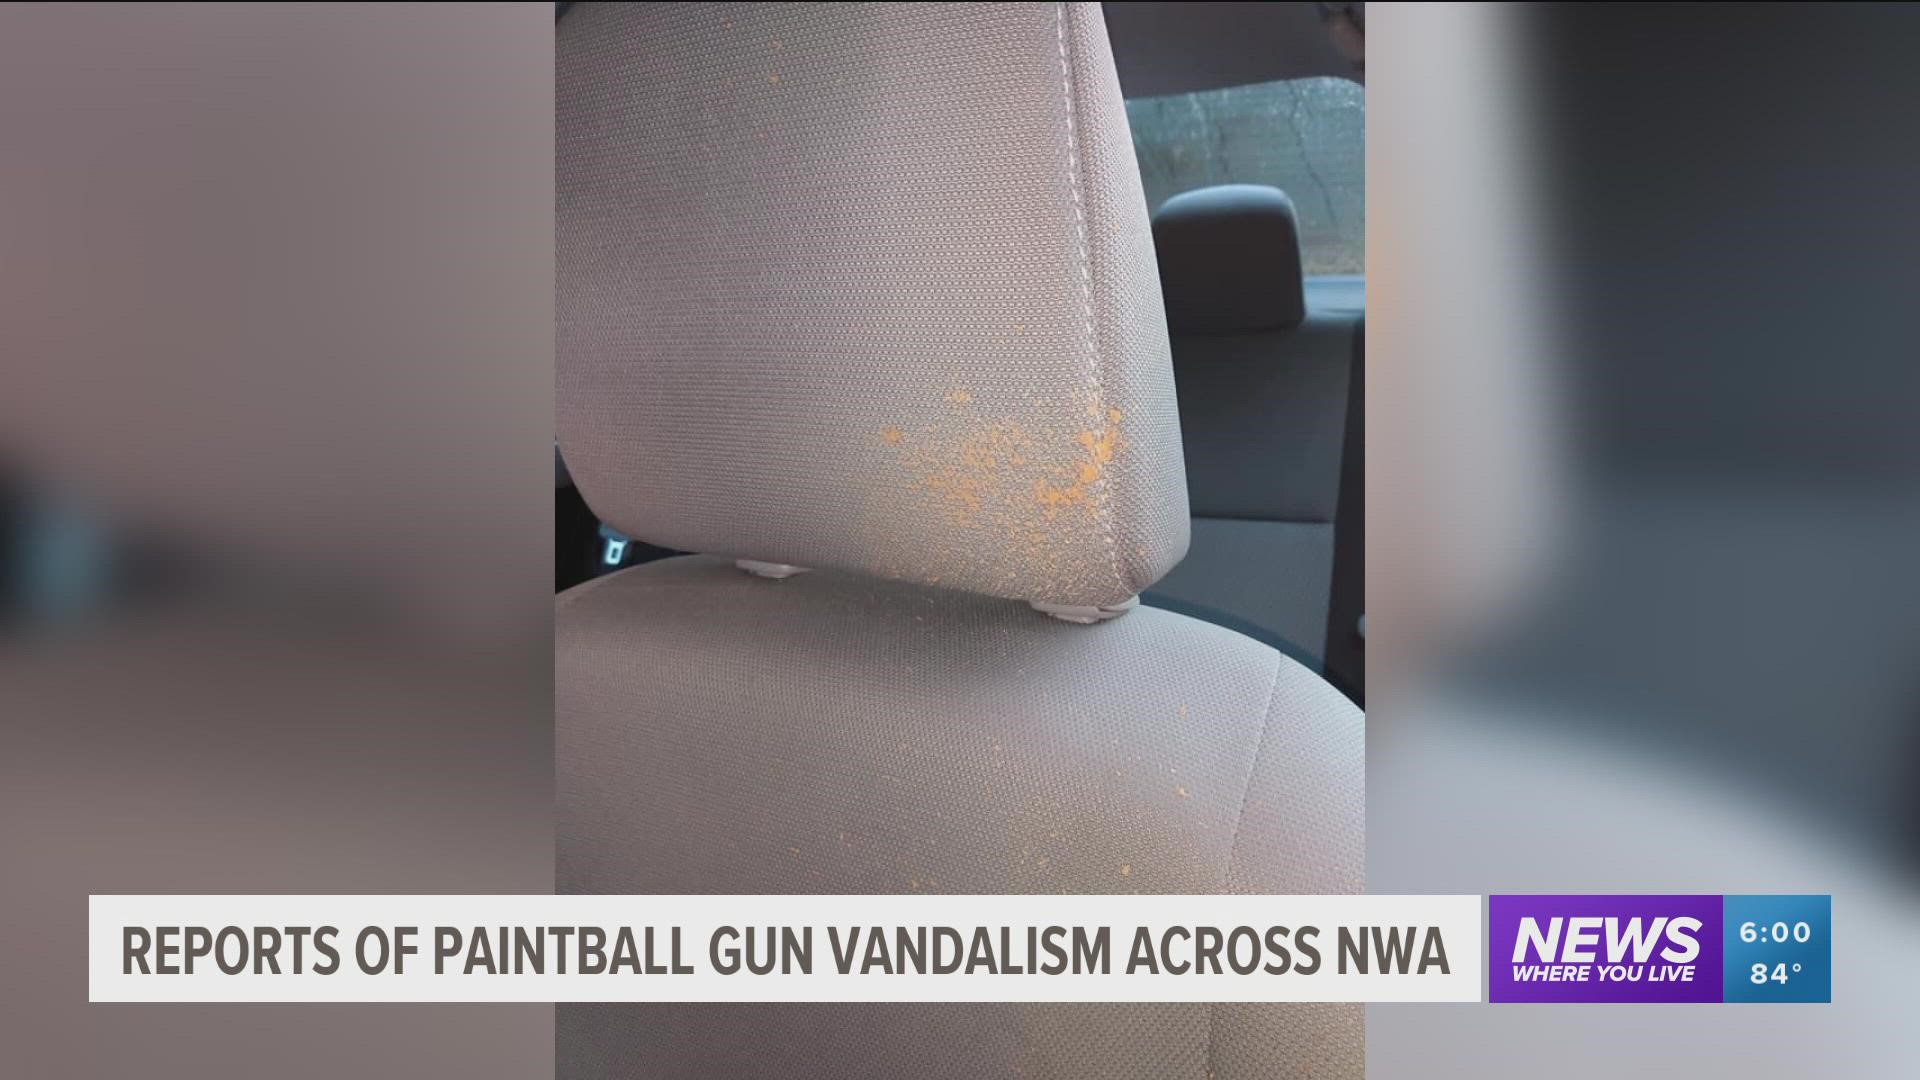 Police say they may have identified juveniles suspected of shooting vehicles with paintballs on Crossover Road.